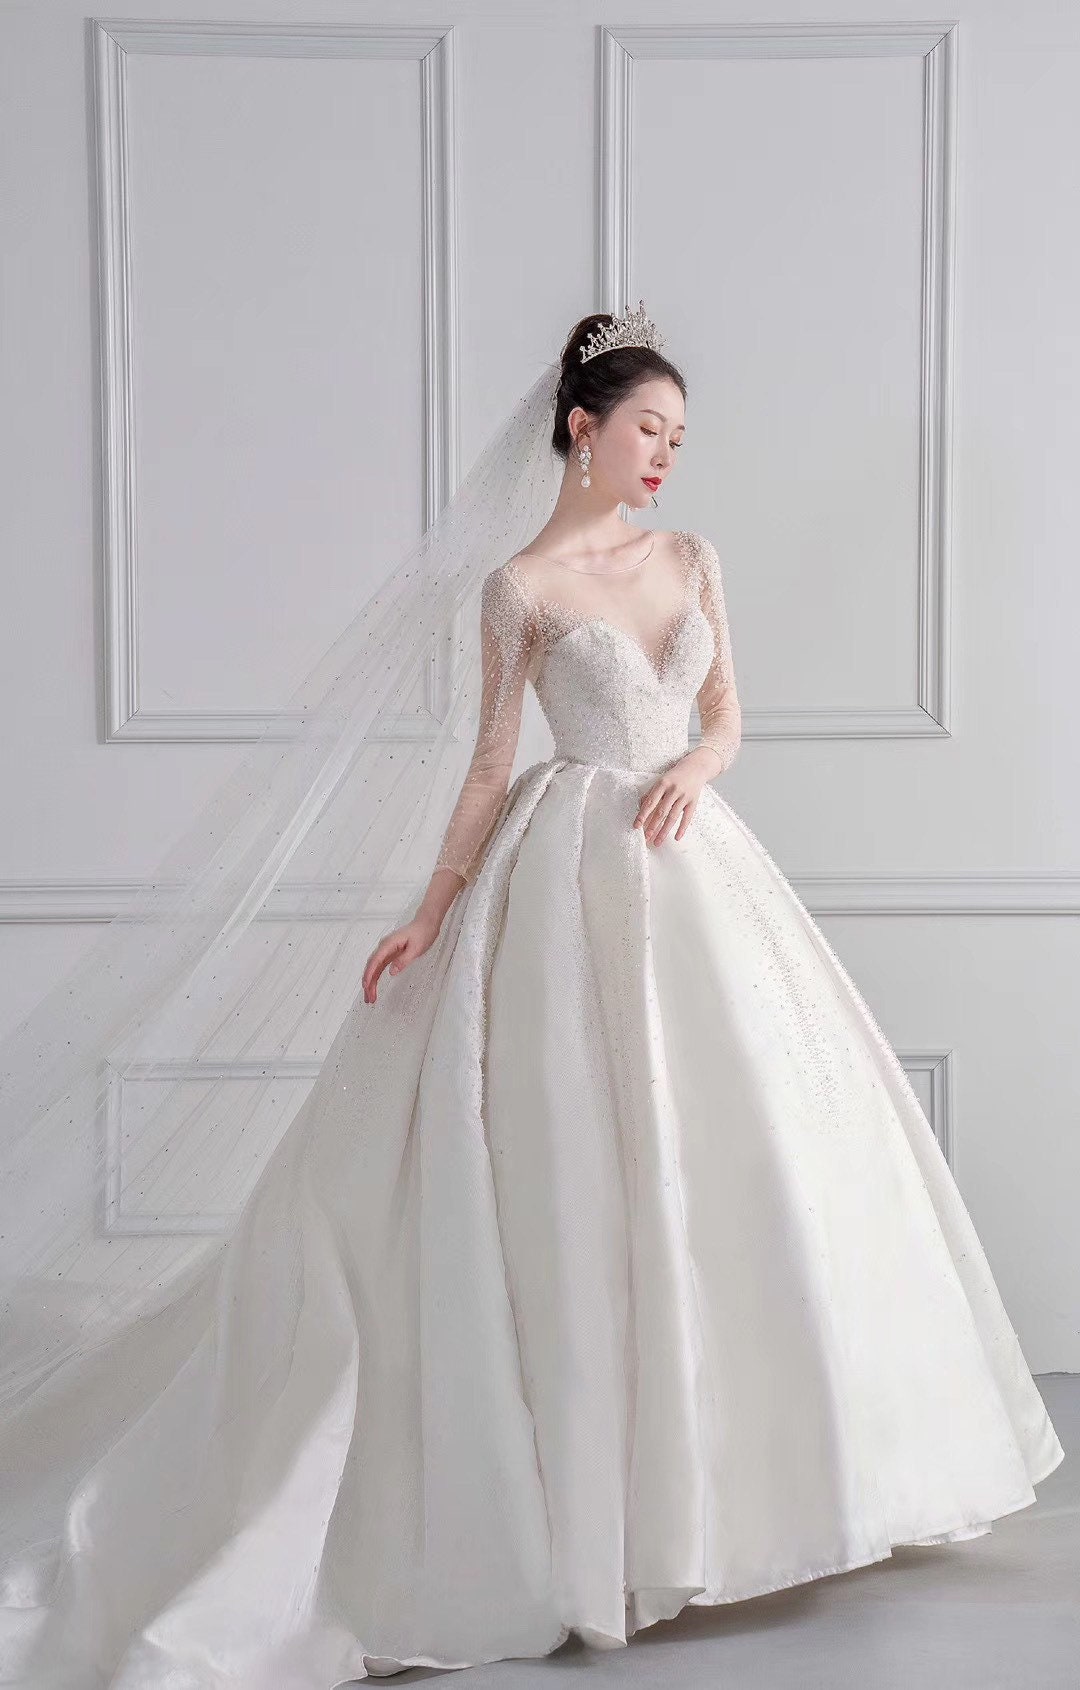 Large - Rental gowns - RoyAnne Camillia Couture- Bridal Gowns and Gown  rentals in ManilaRoyAnne Camillia Couture- Bridal Gowns and Gown rentals in  Manila